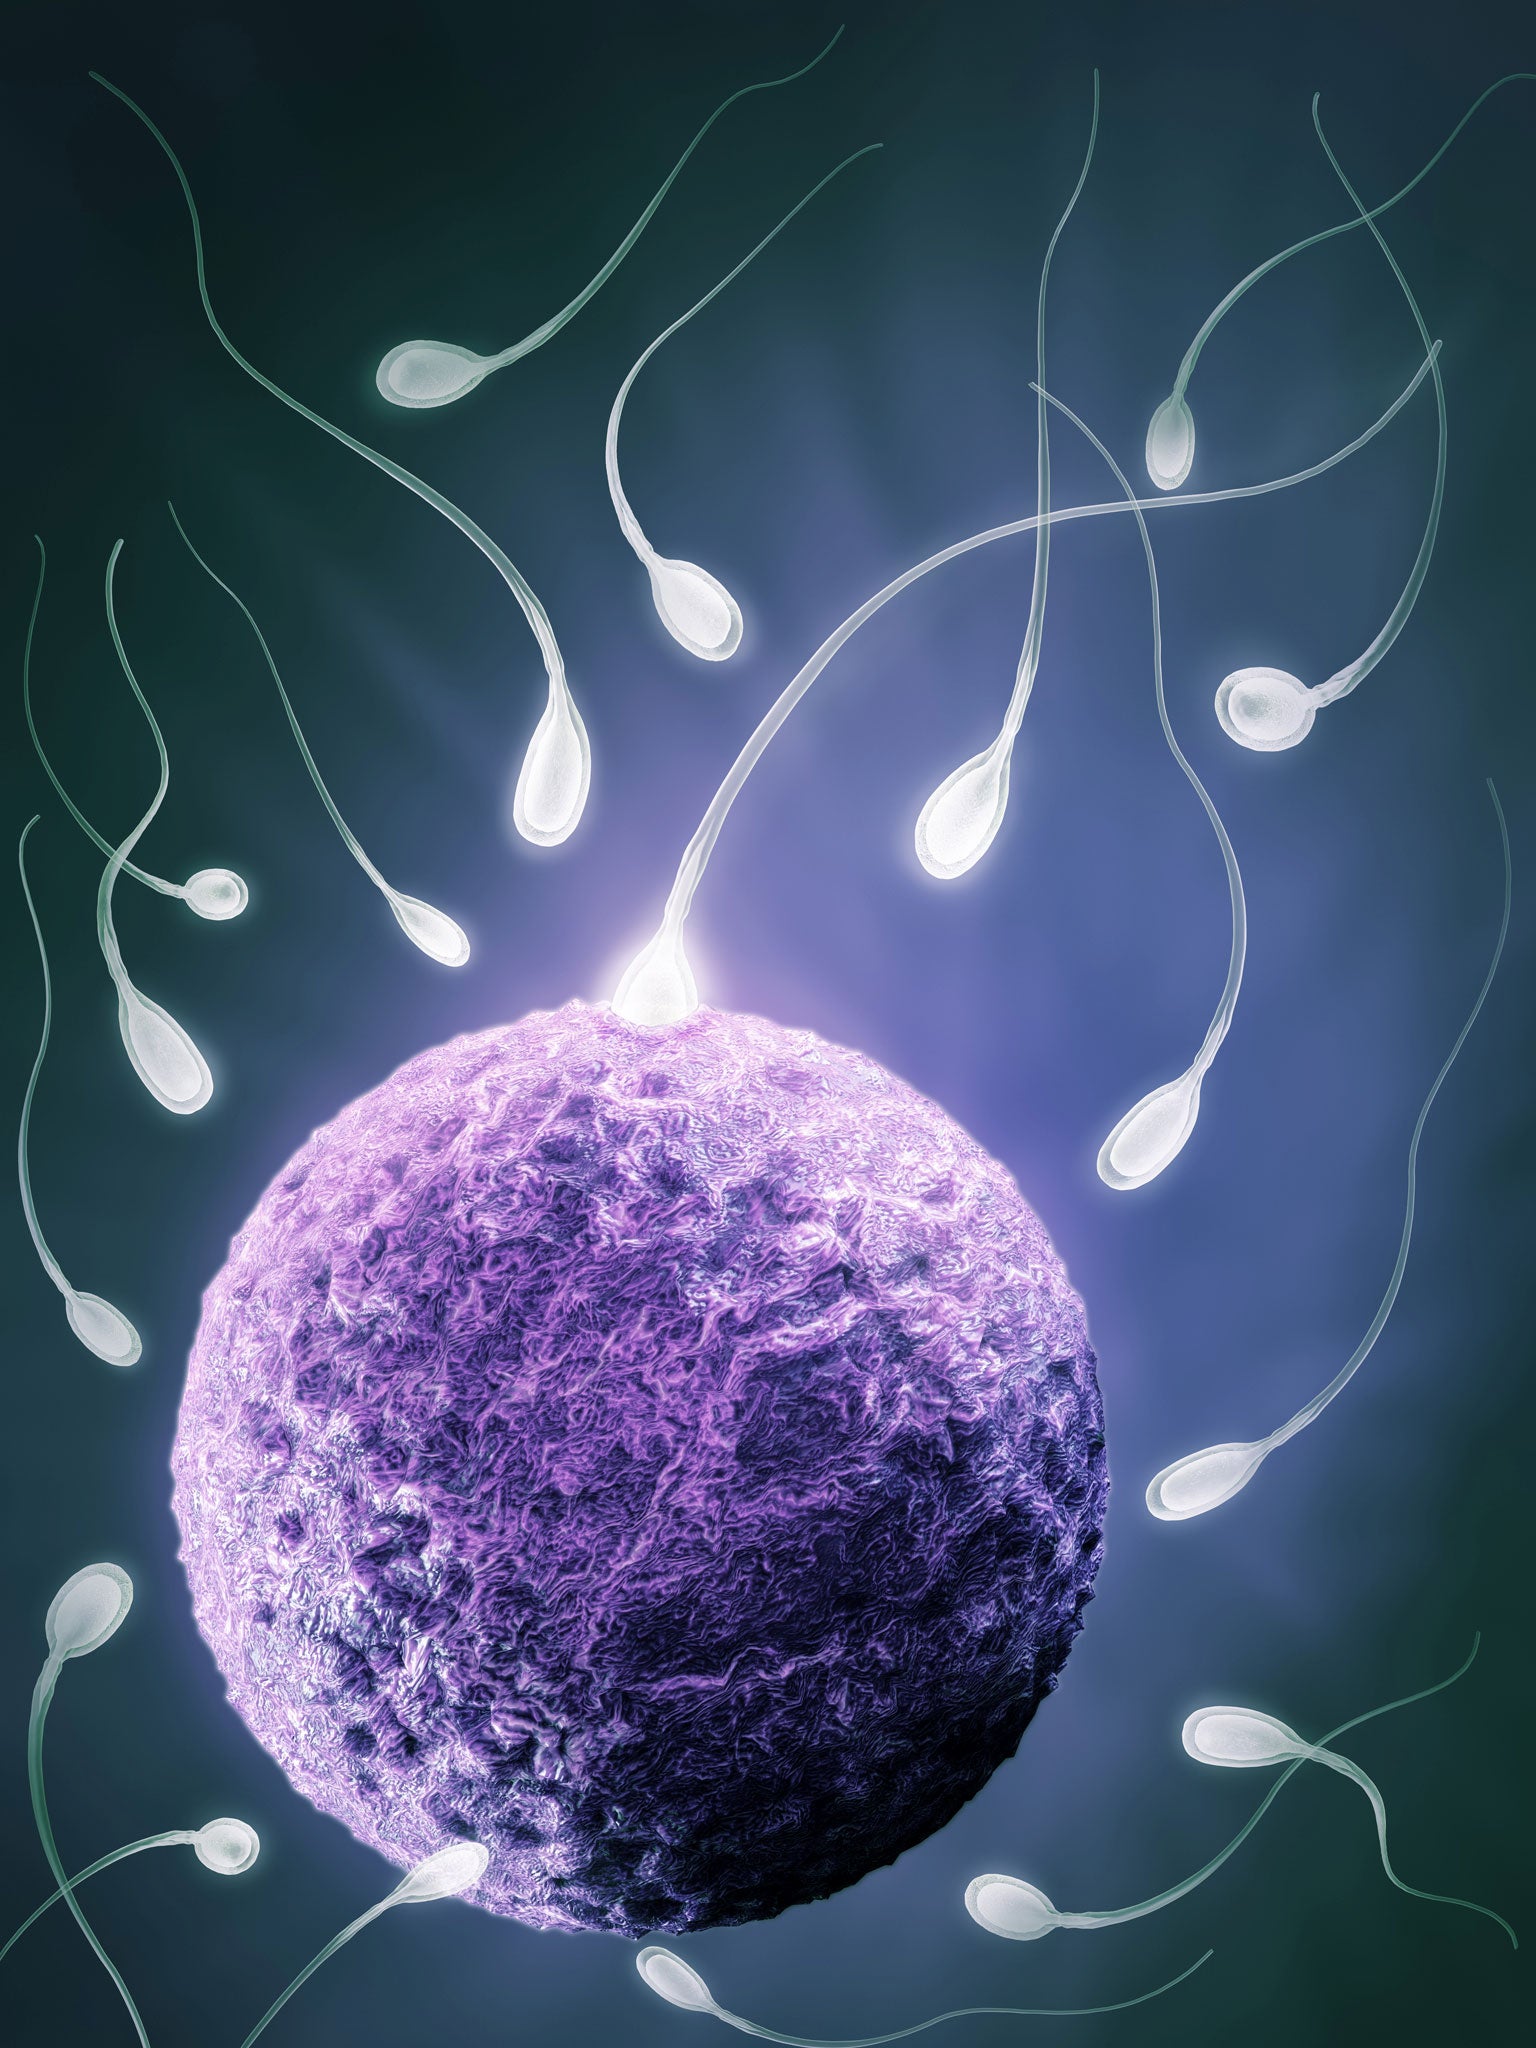 The study found the ‘swimming behaviour’ of sperm was affected